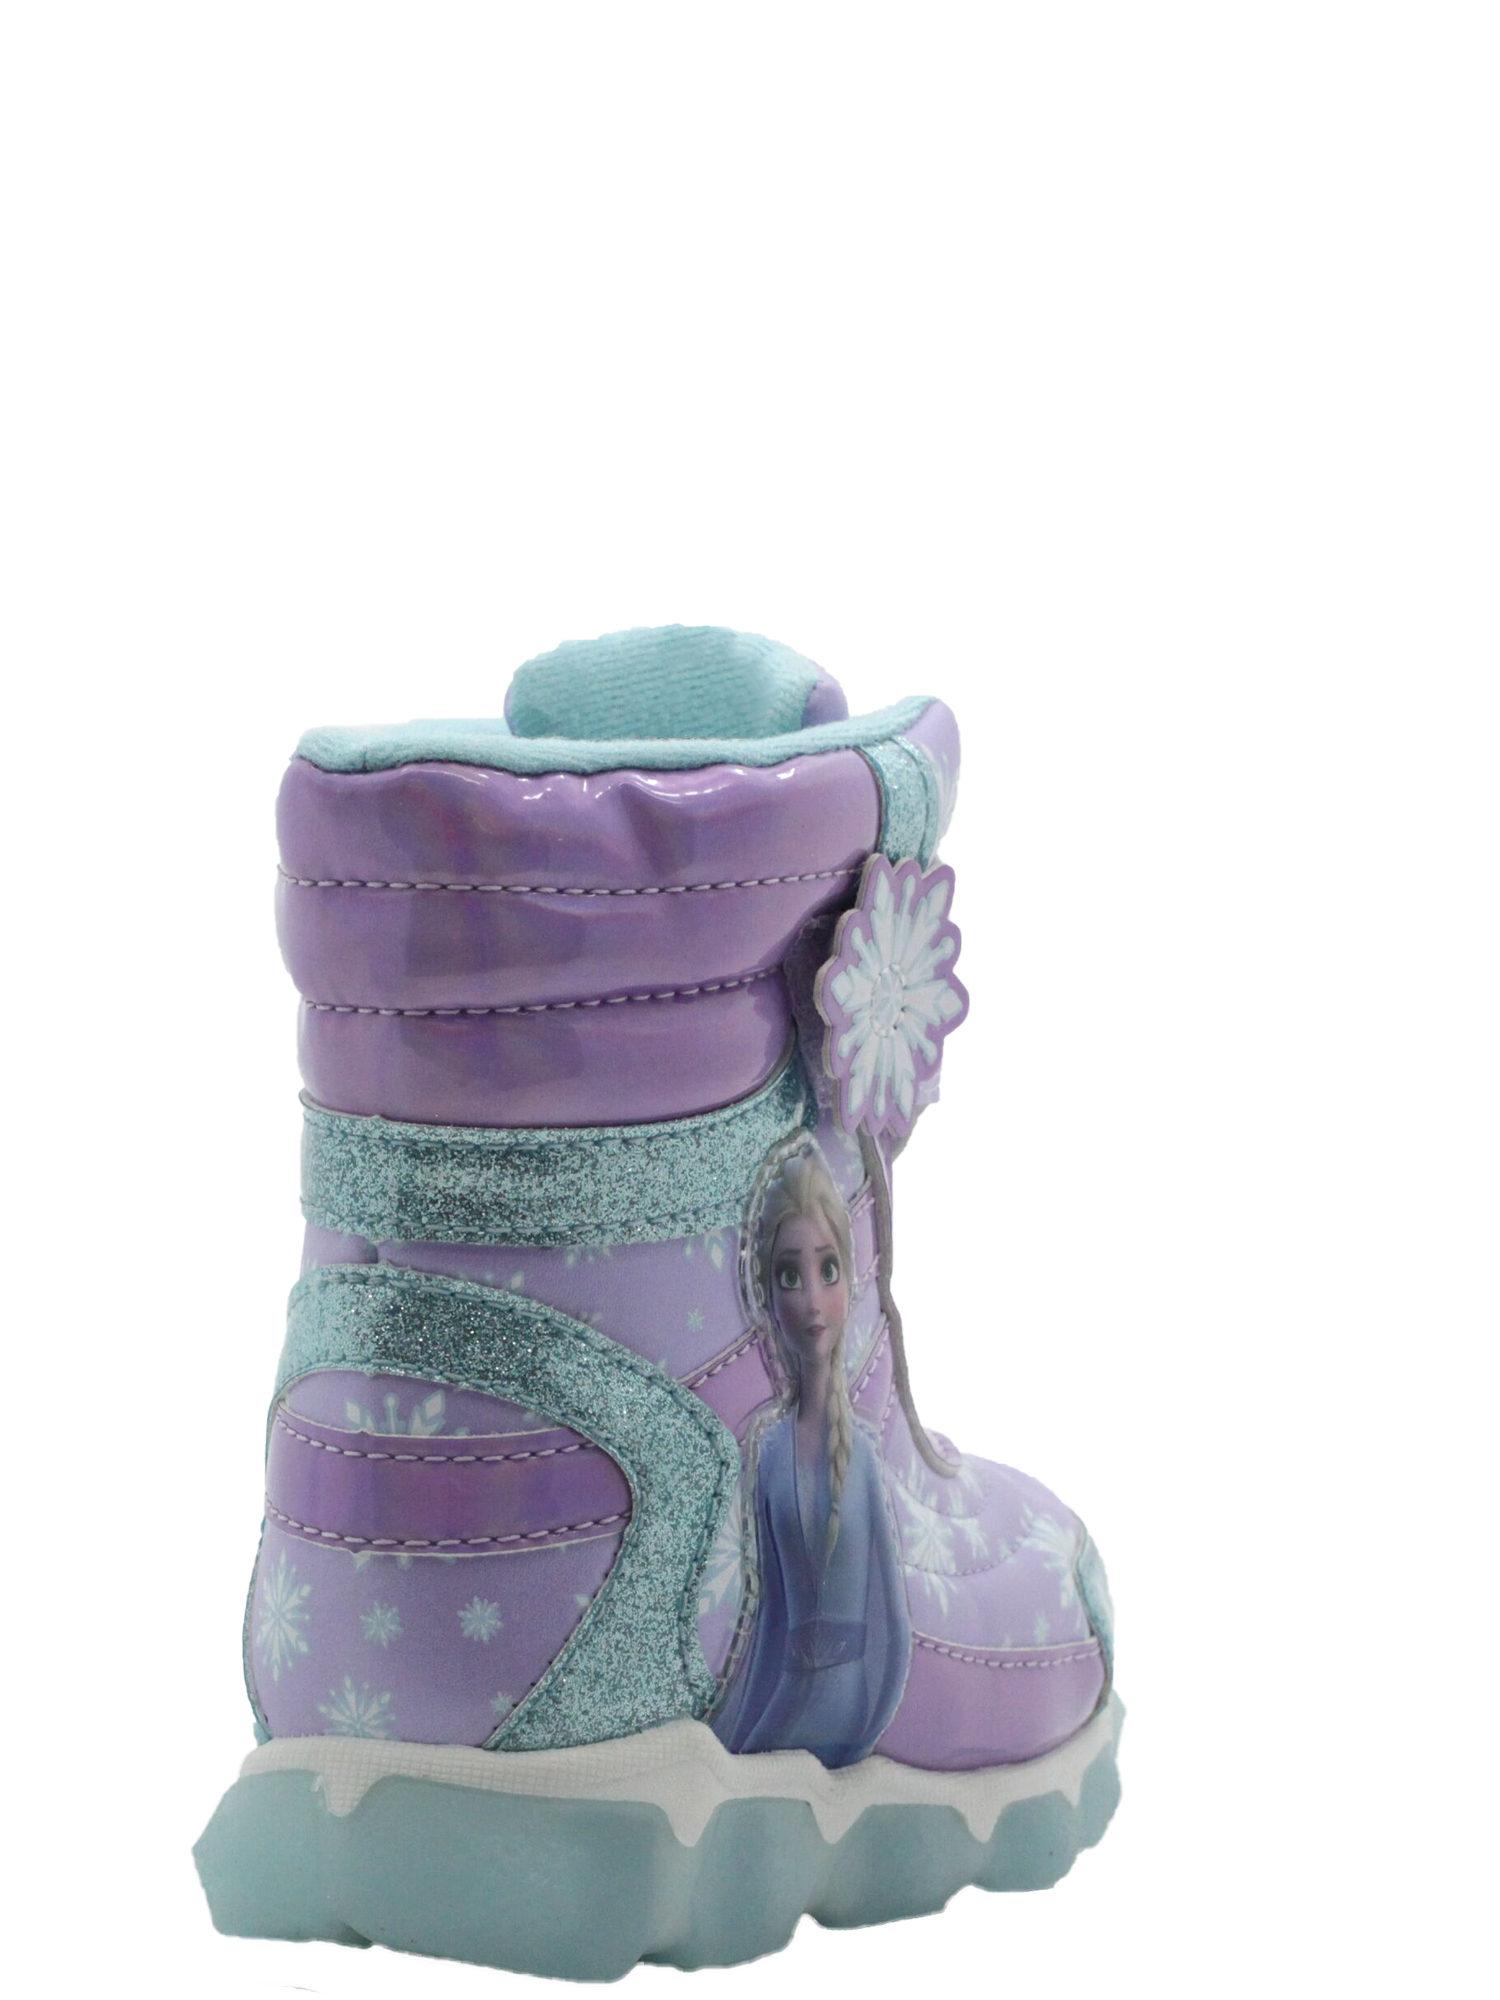 Disney Frozen 2 Bubble Snow Boot (Toddler Girls) - image 3 of 6